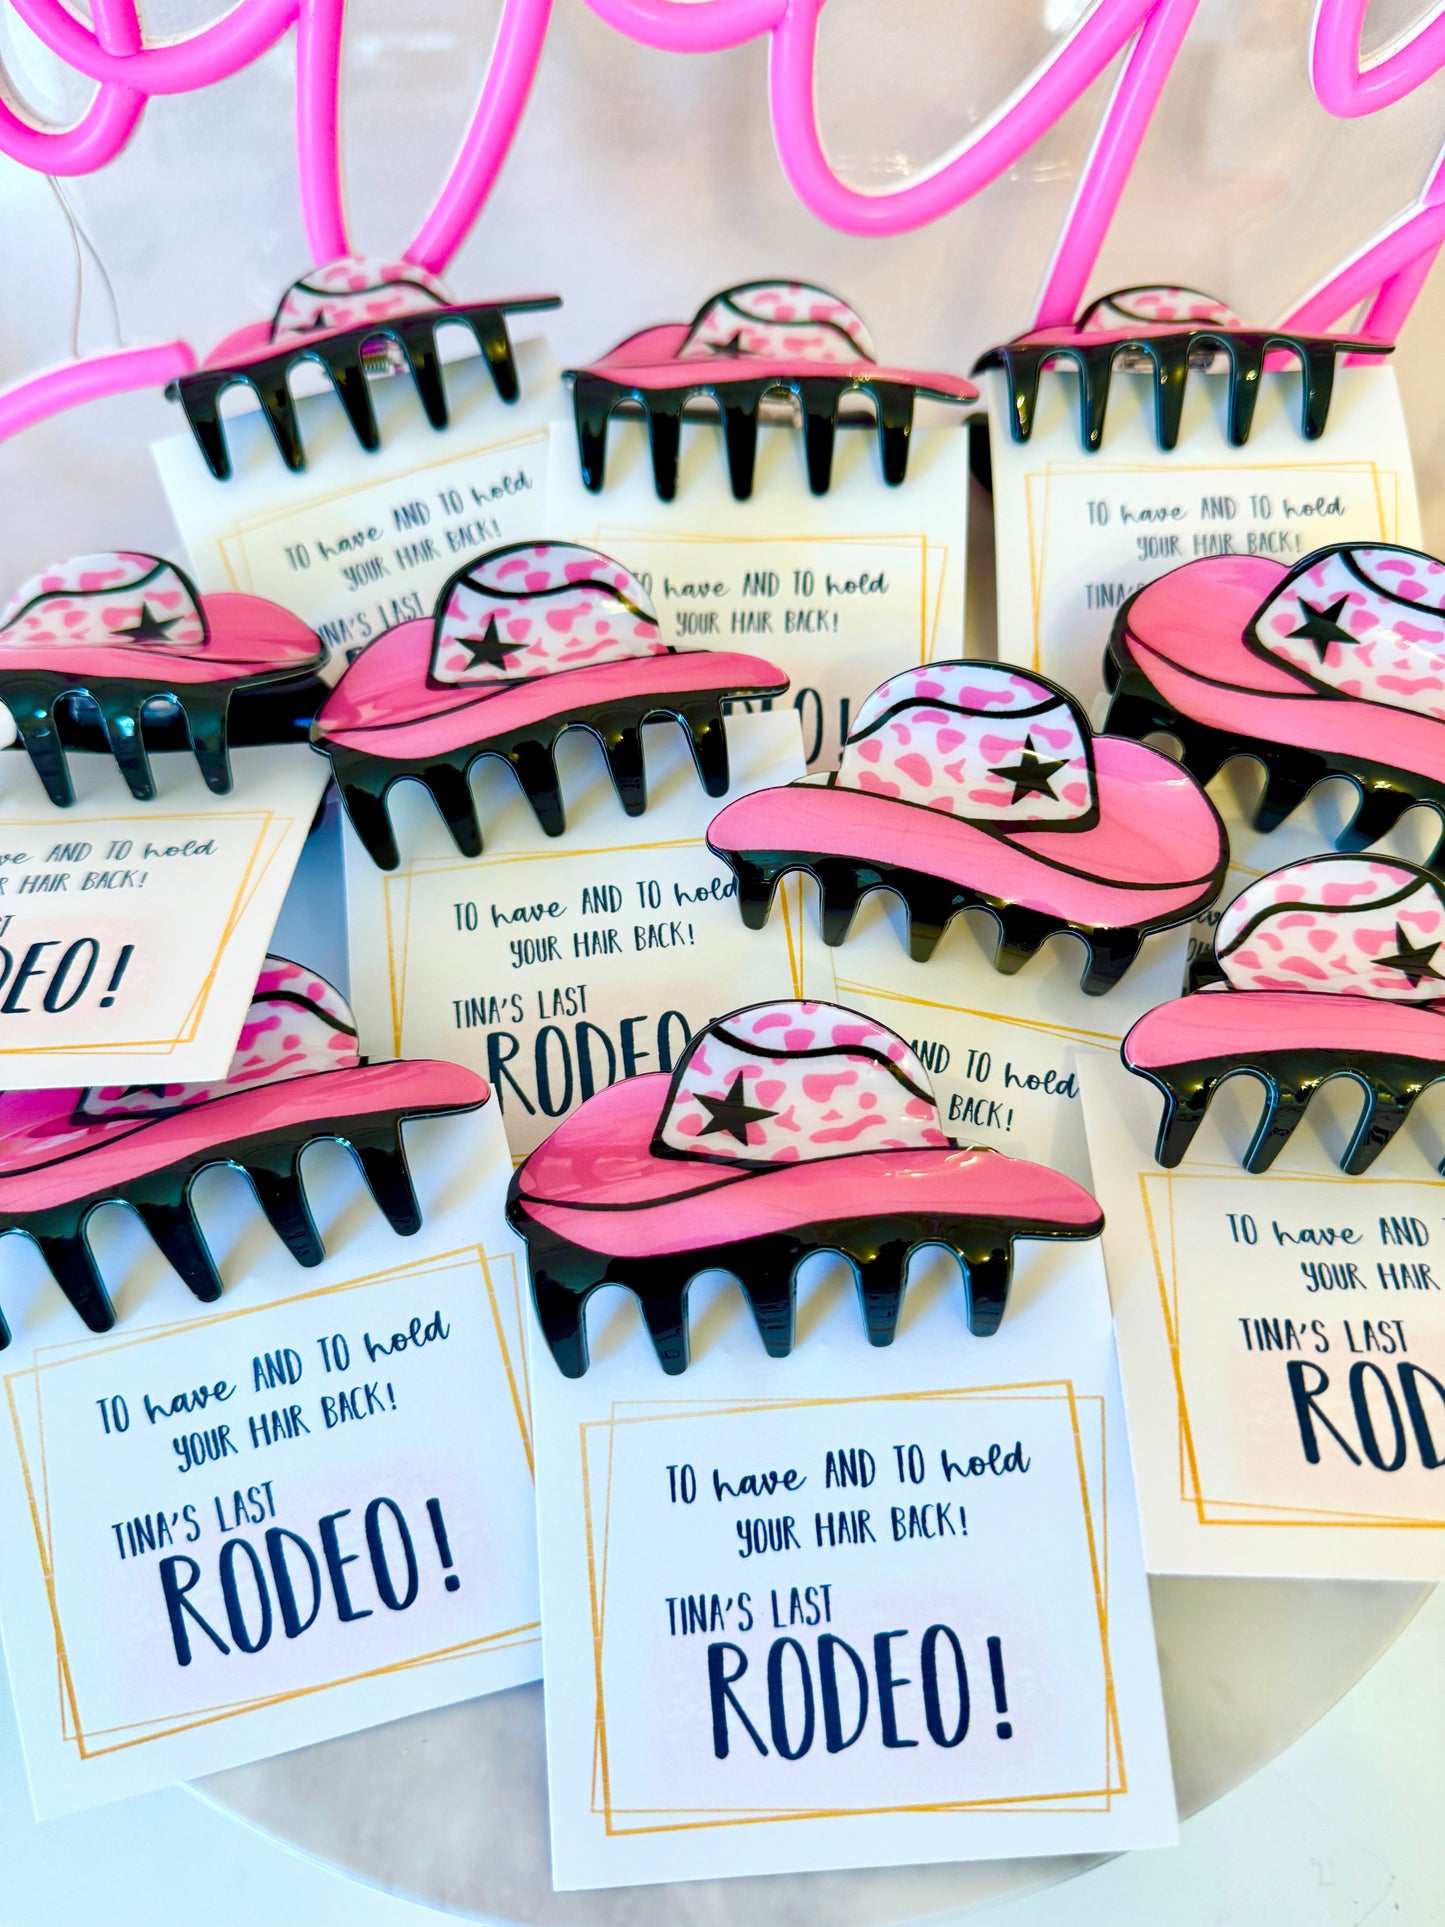 Last Rodeo, Bachelorette party gift, Nashville bridesmaid gift, Cowgirl, Cowboy bridal party gift, bridesmaid claw clip, Bridal party favor